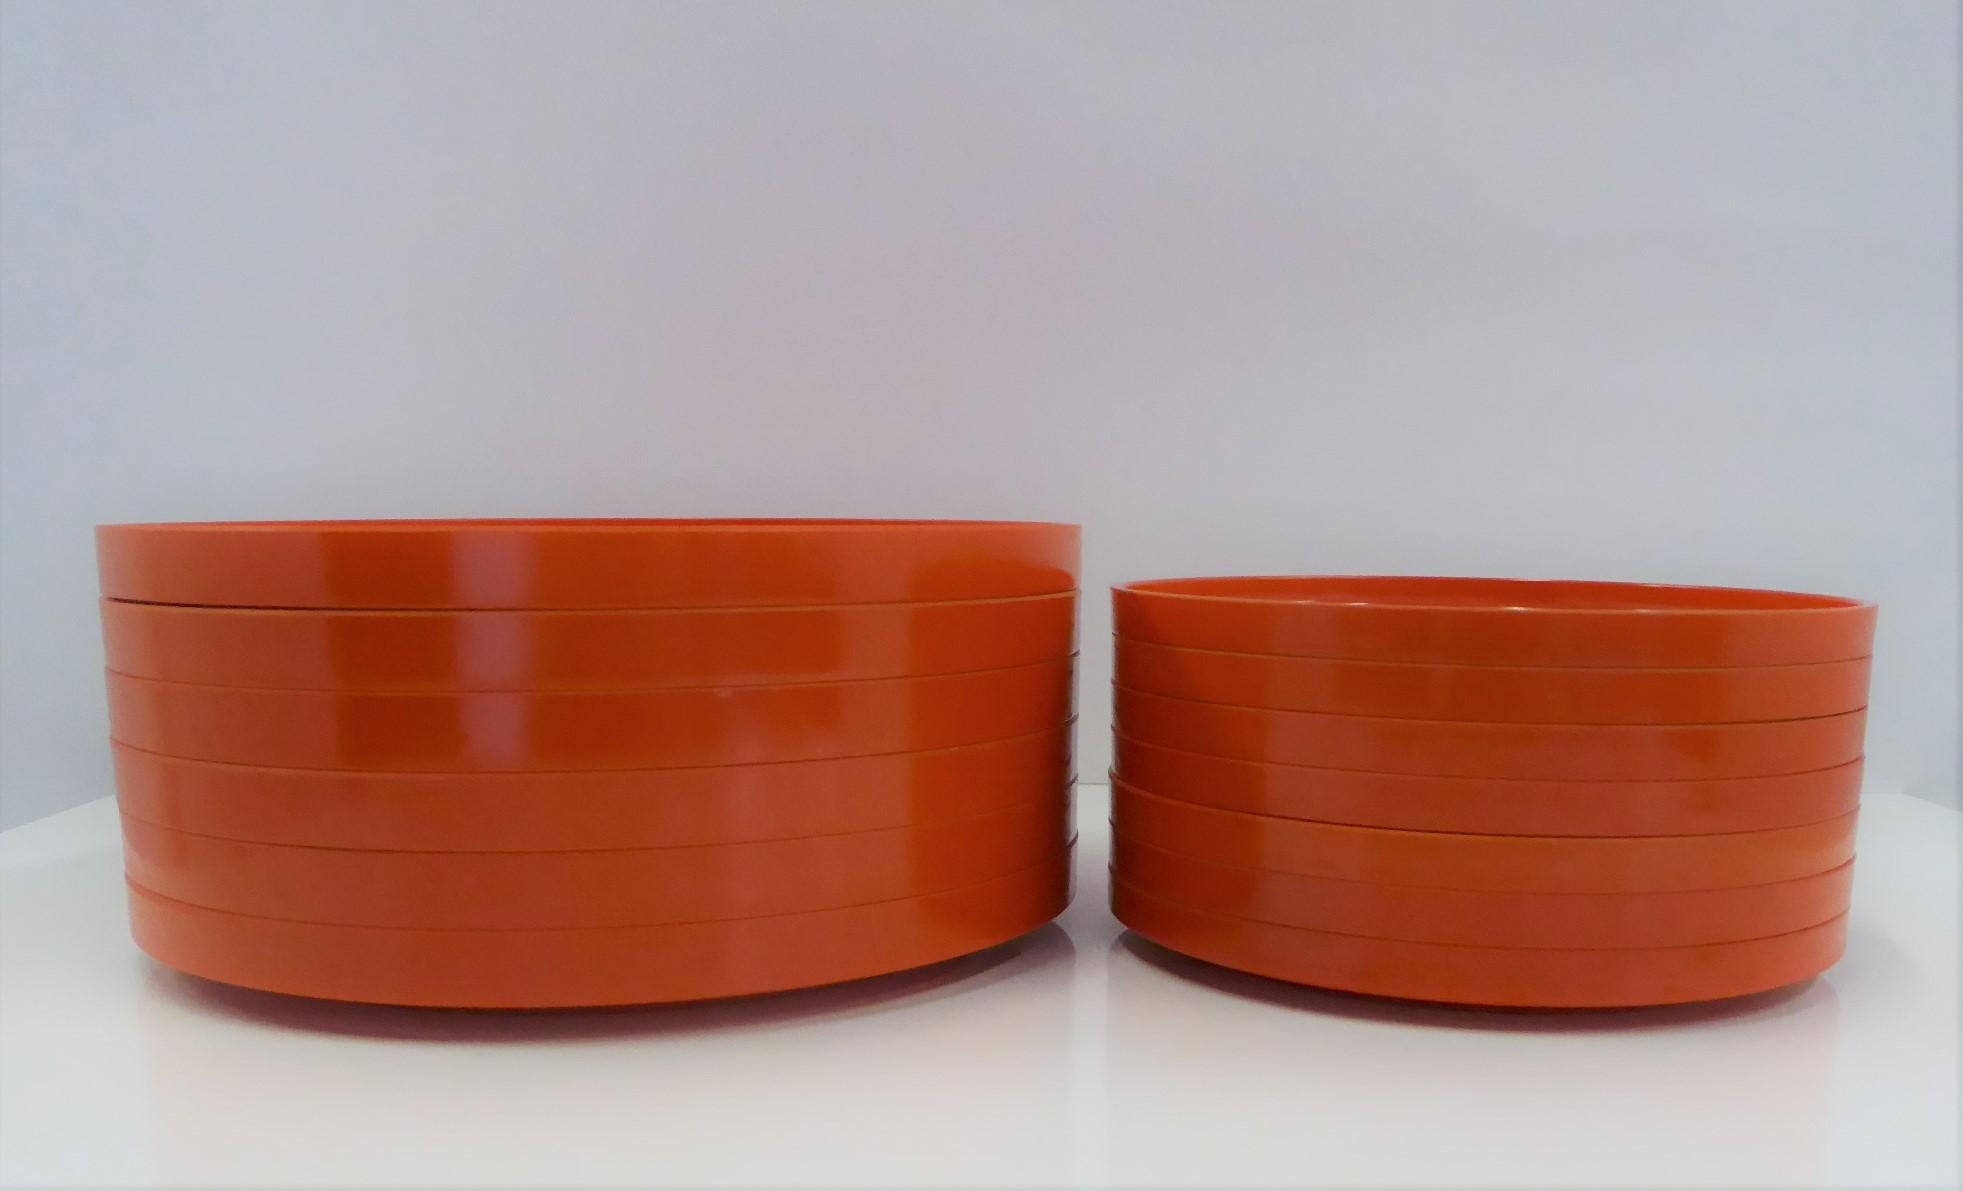 Italian Massimo Vignelli for Heller Set of Max 2 ABS Dinnerware, Italy 1960s - 22 Pieces